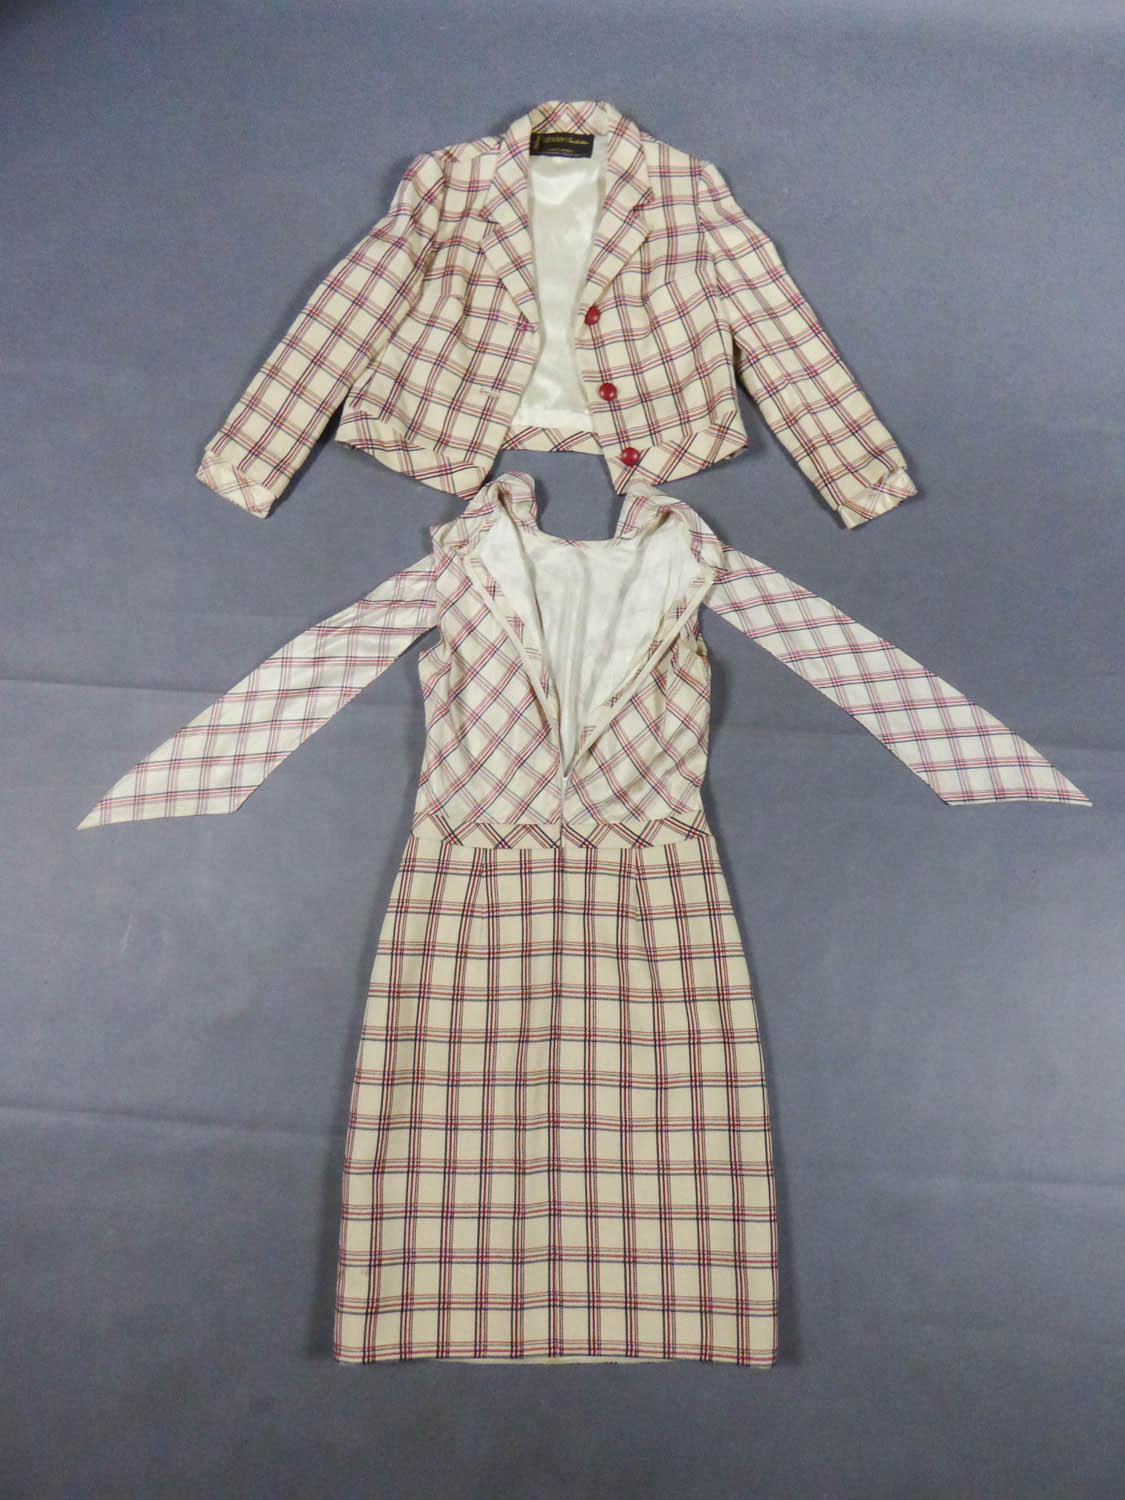 Circa 1970
France

Jacket and dress set in ivory nylon and woollen cloth with red and blue plaid from the 70s. Fitted jacked with wide-tabs on the hips closing on the front with front snap fasteners and three red leather buttons. Dress with straight